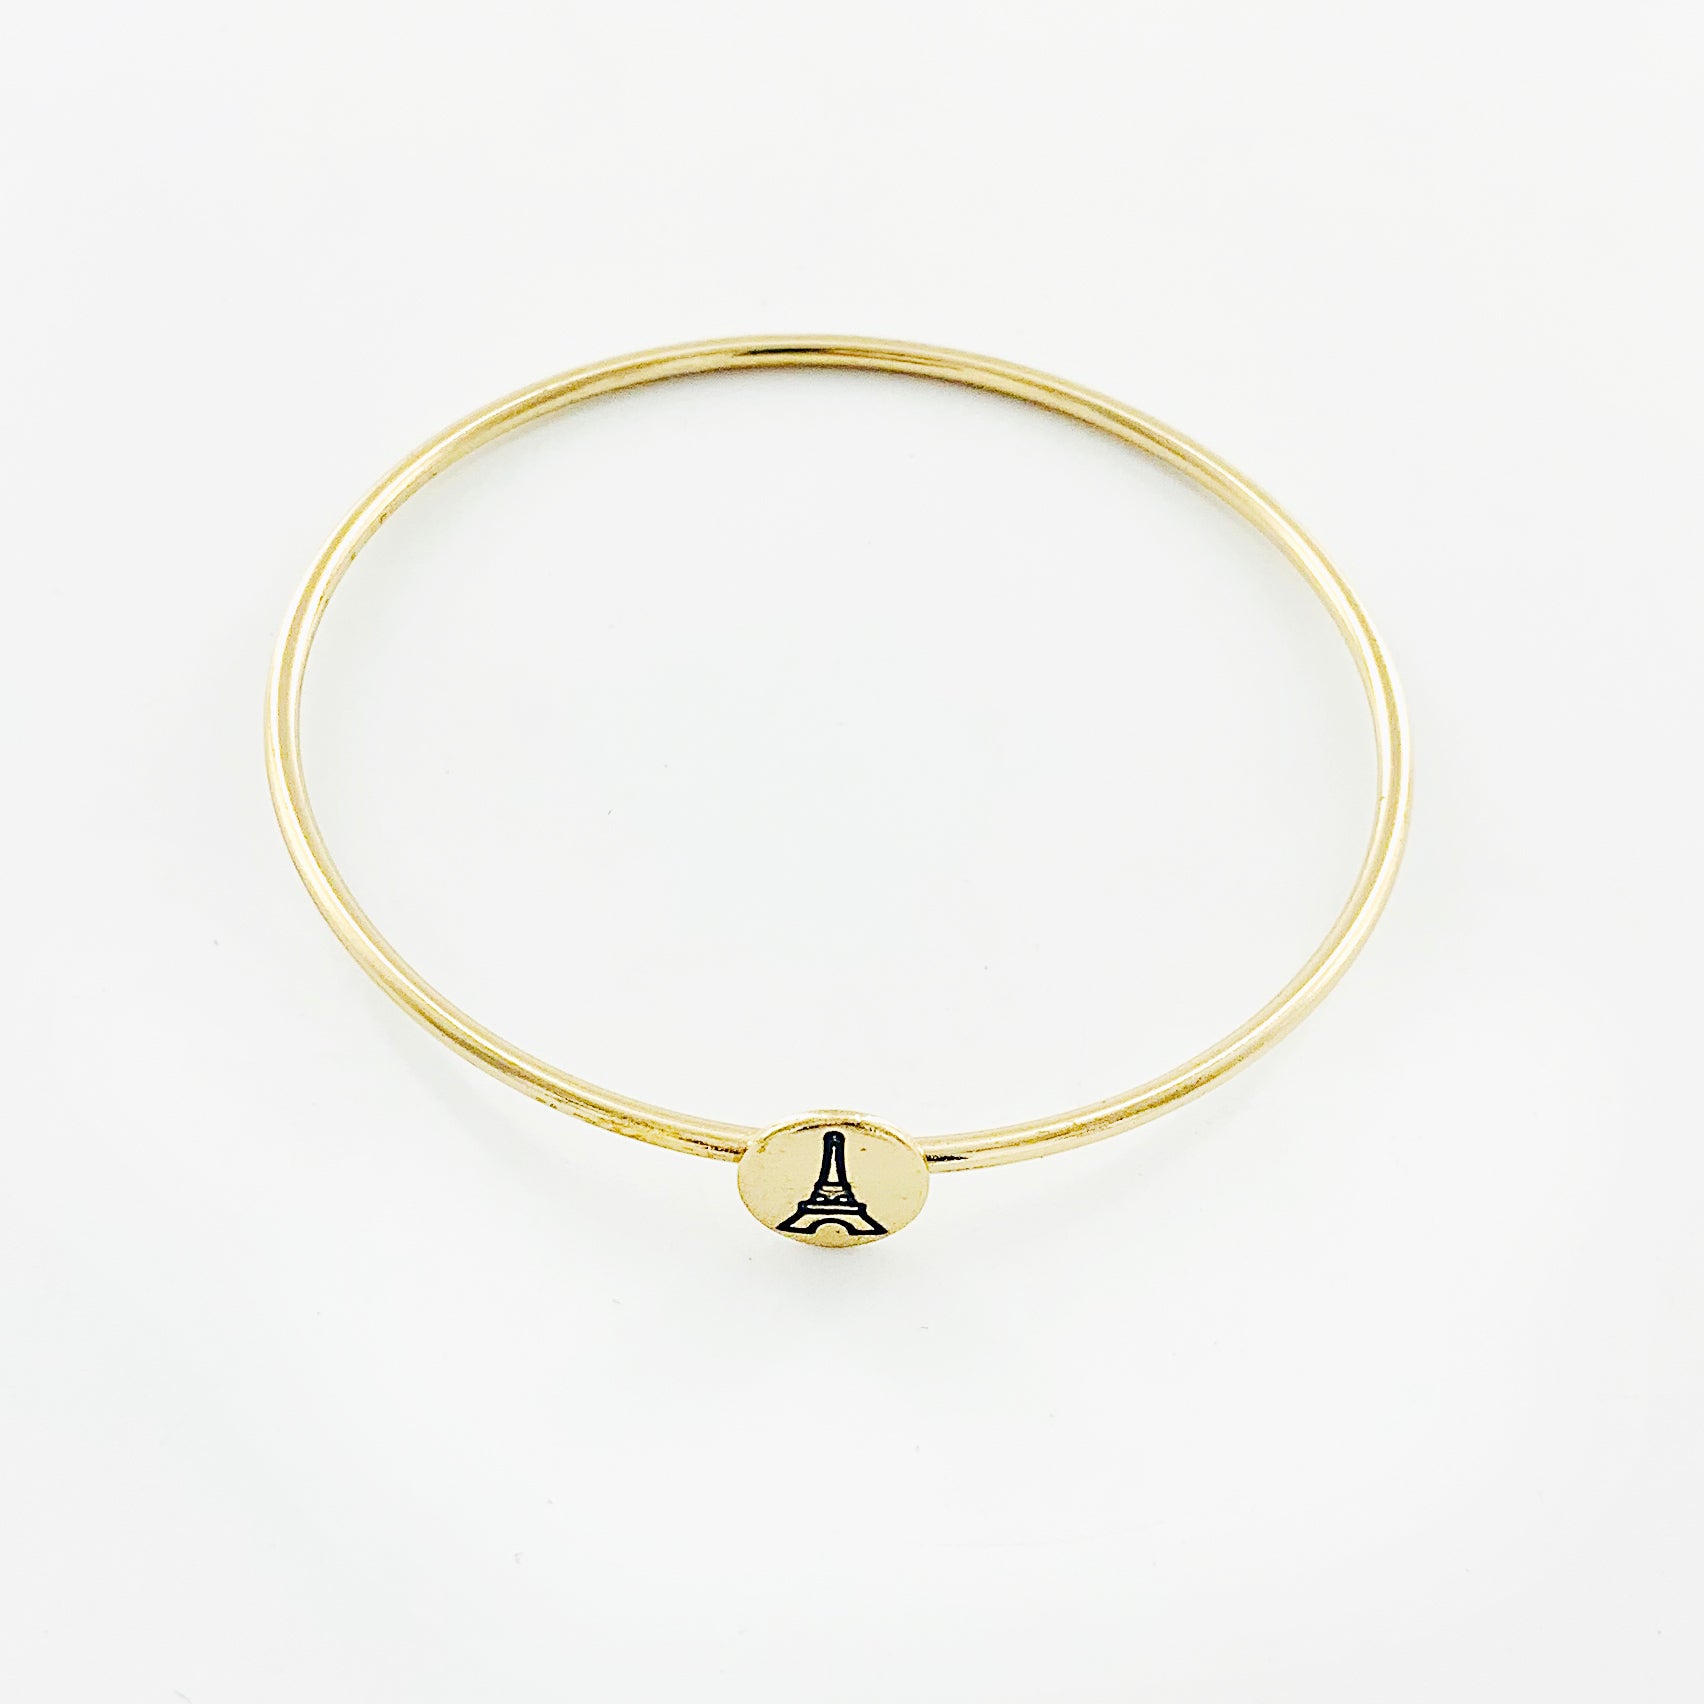 Thin gold bangle with engraved Eiffel Tower disc